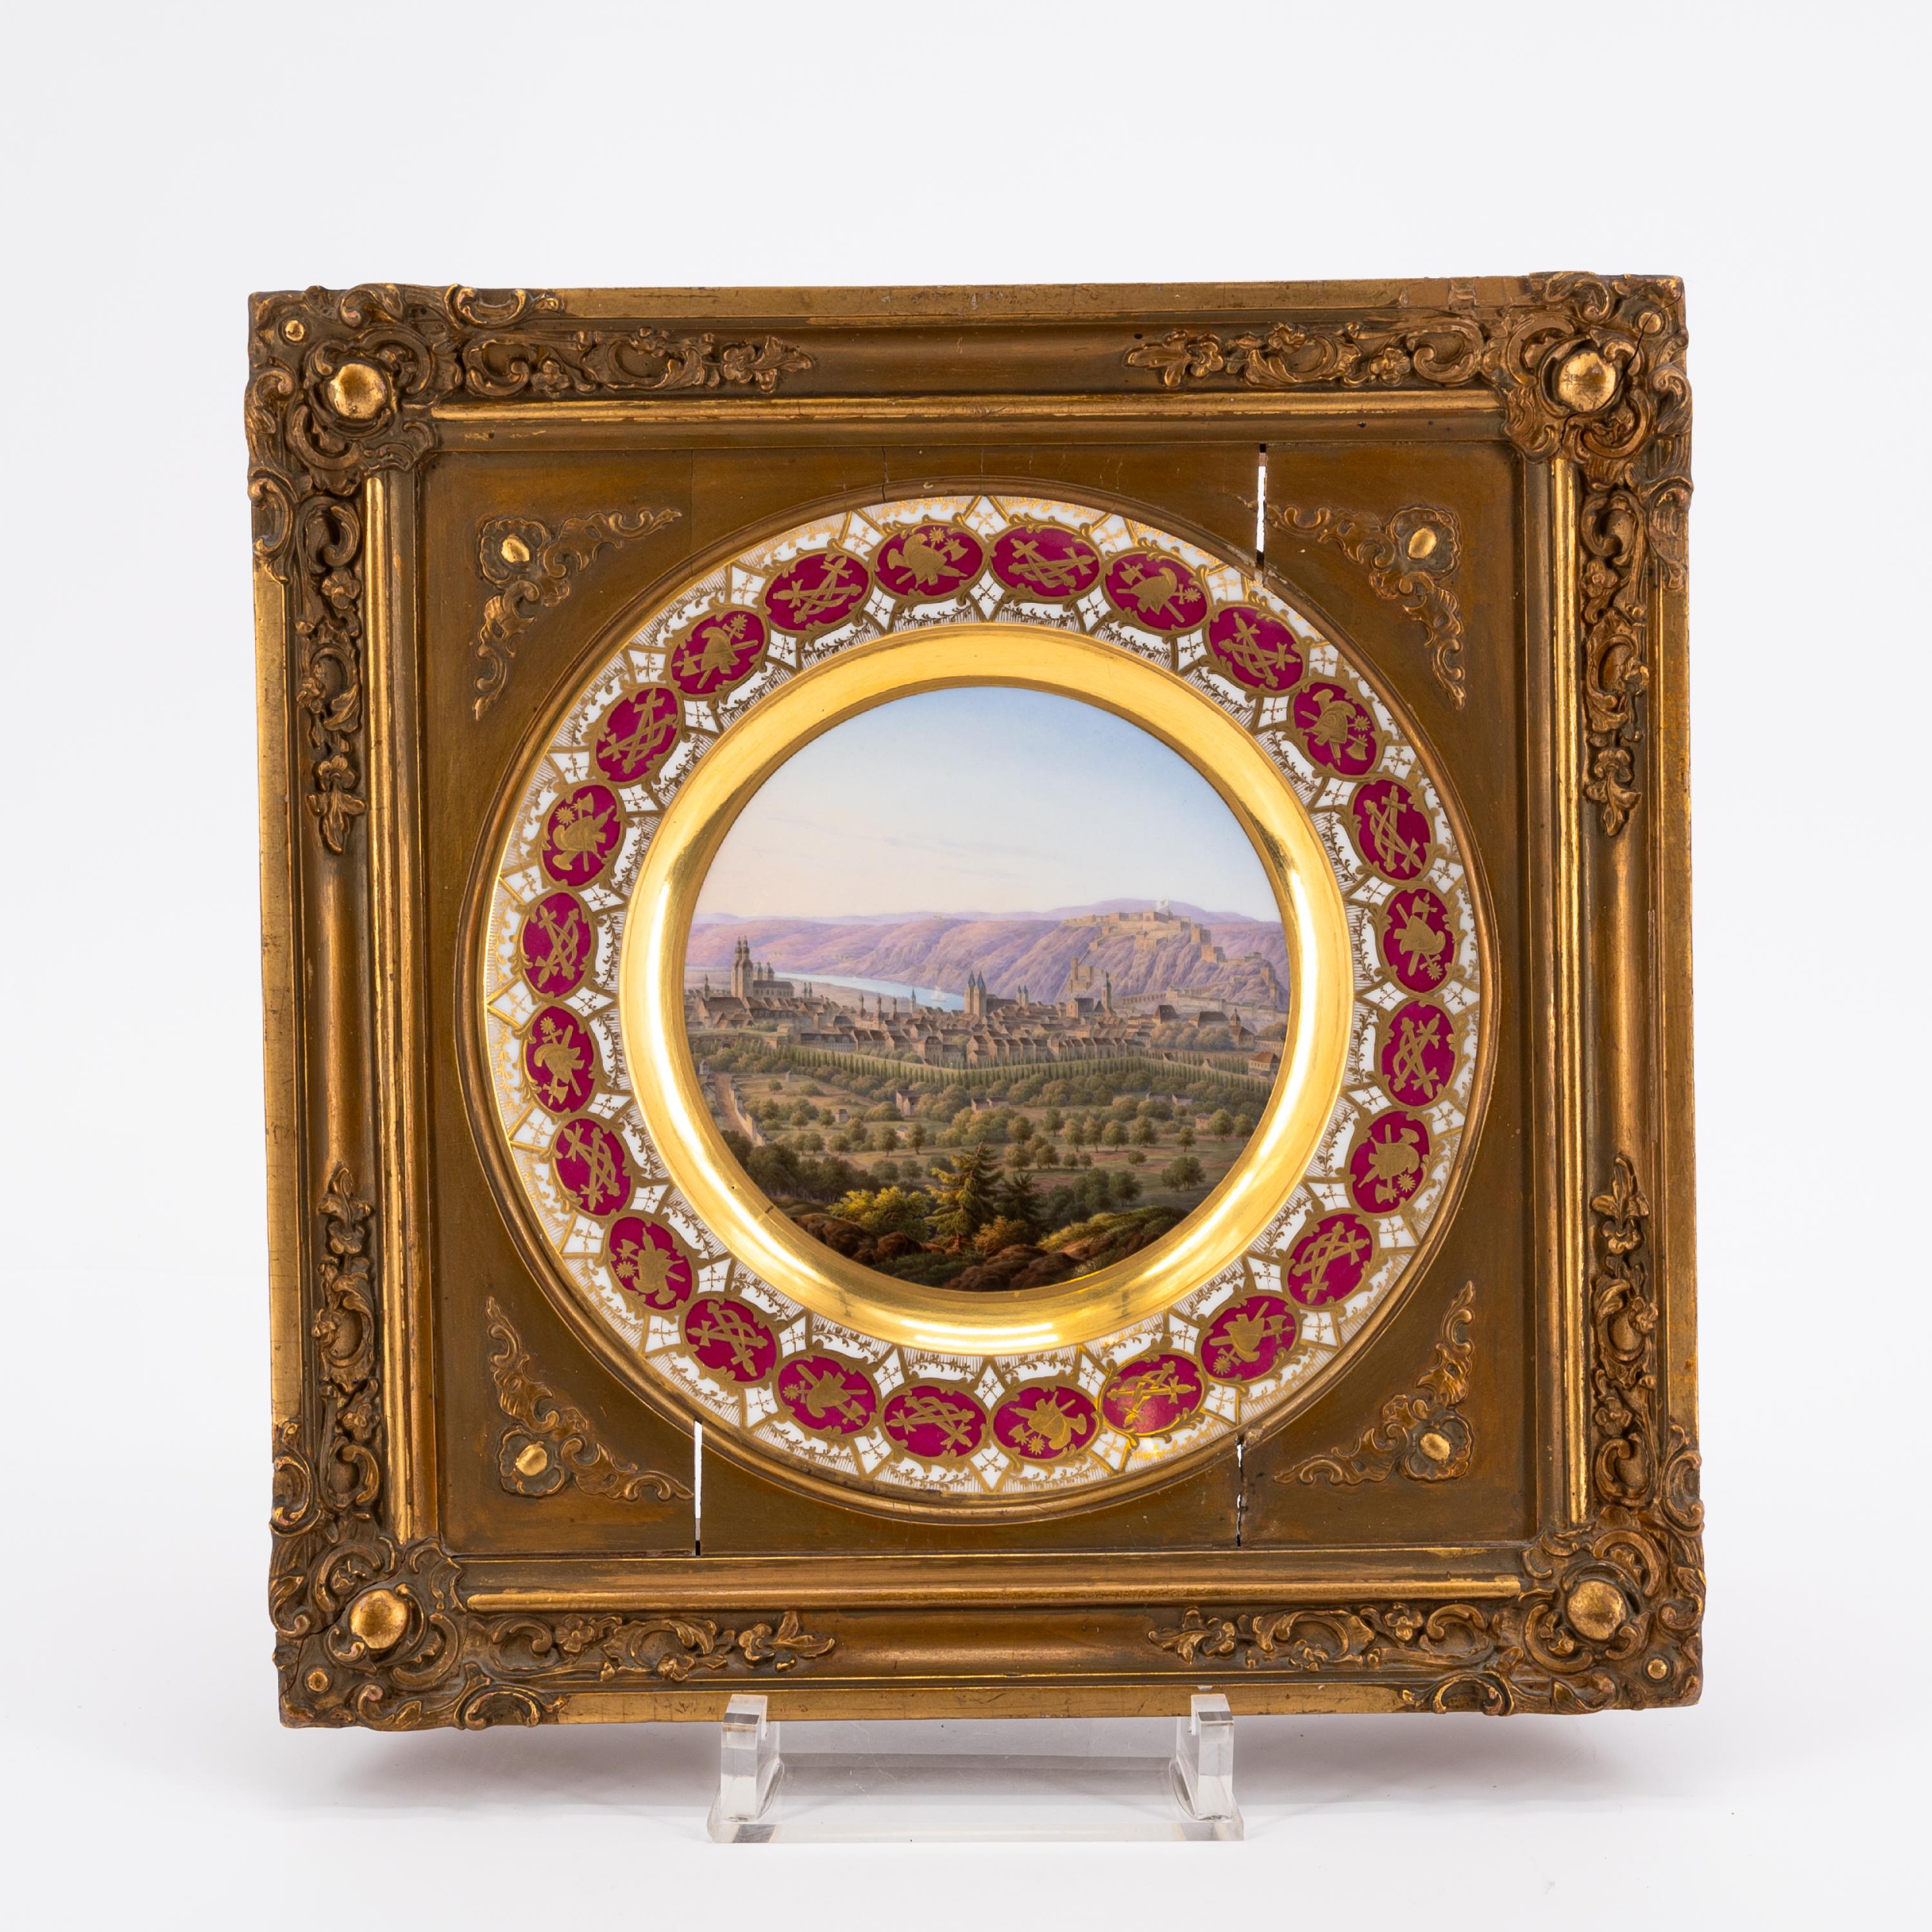 EXEPTIONAL SERIES OF TWELVE PORCELAIN PLATES WITH ROMANTIC VIEWS OF THE RHINE - Image 23 of 26